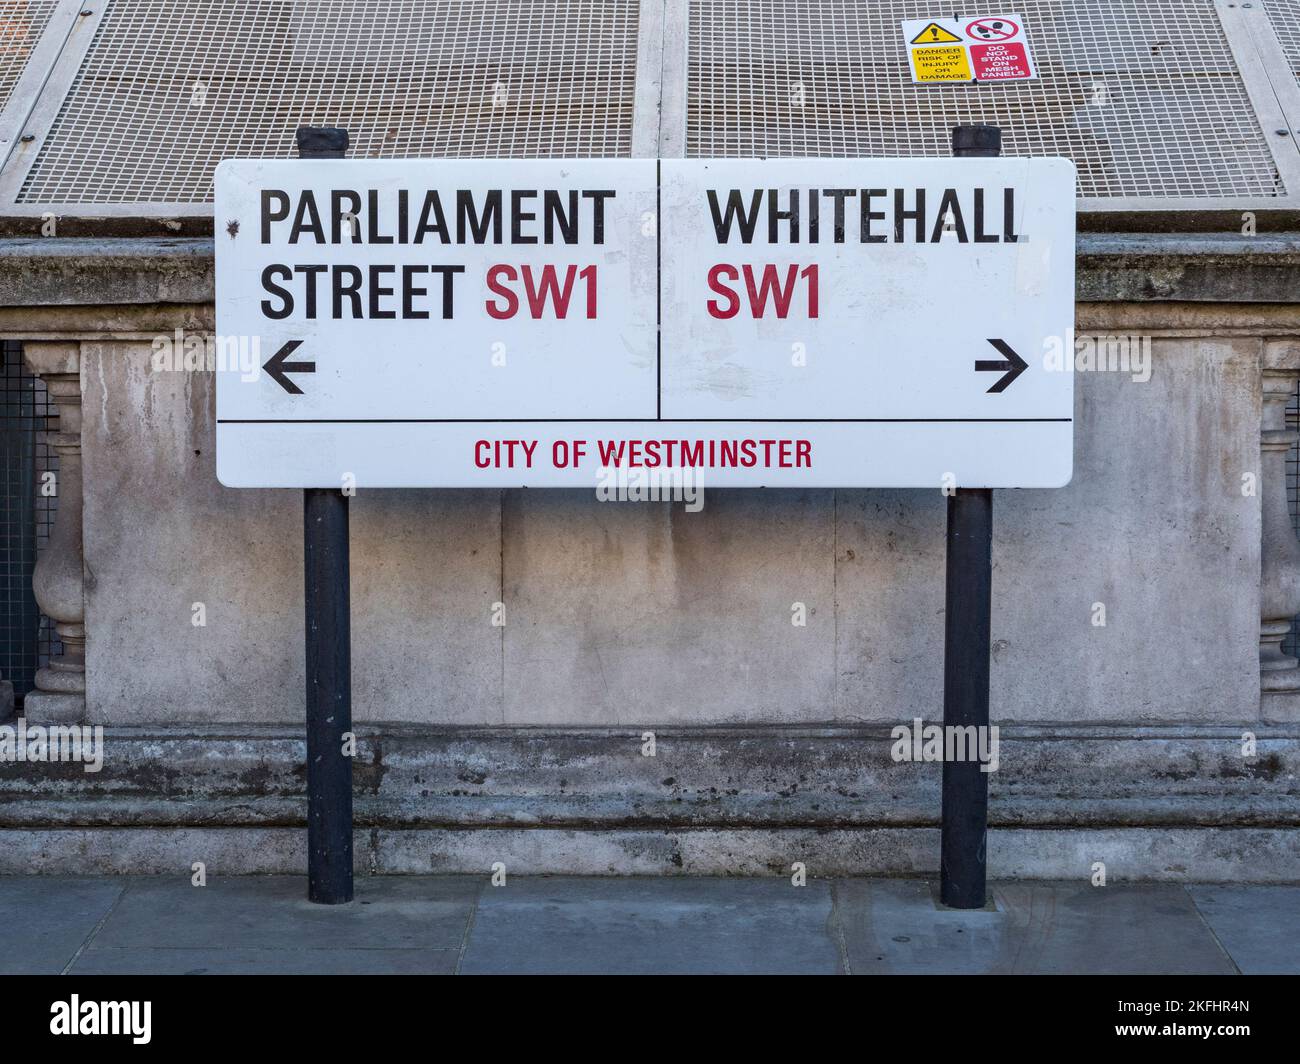 A street sign indicating the junction of Parliament Street and Whitehall, City of Westminster, SW1, London, UK. Stock Photo